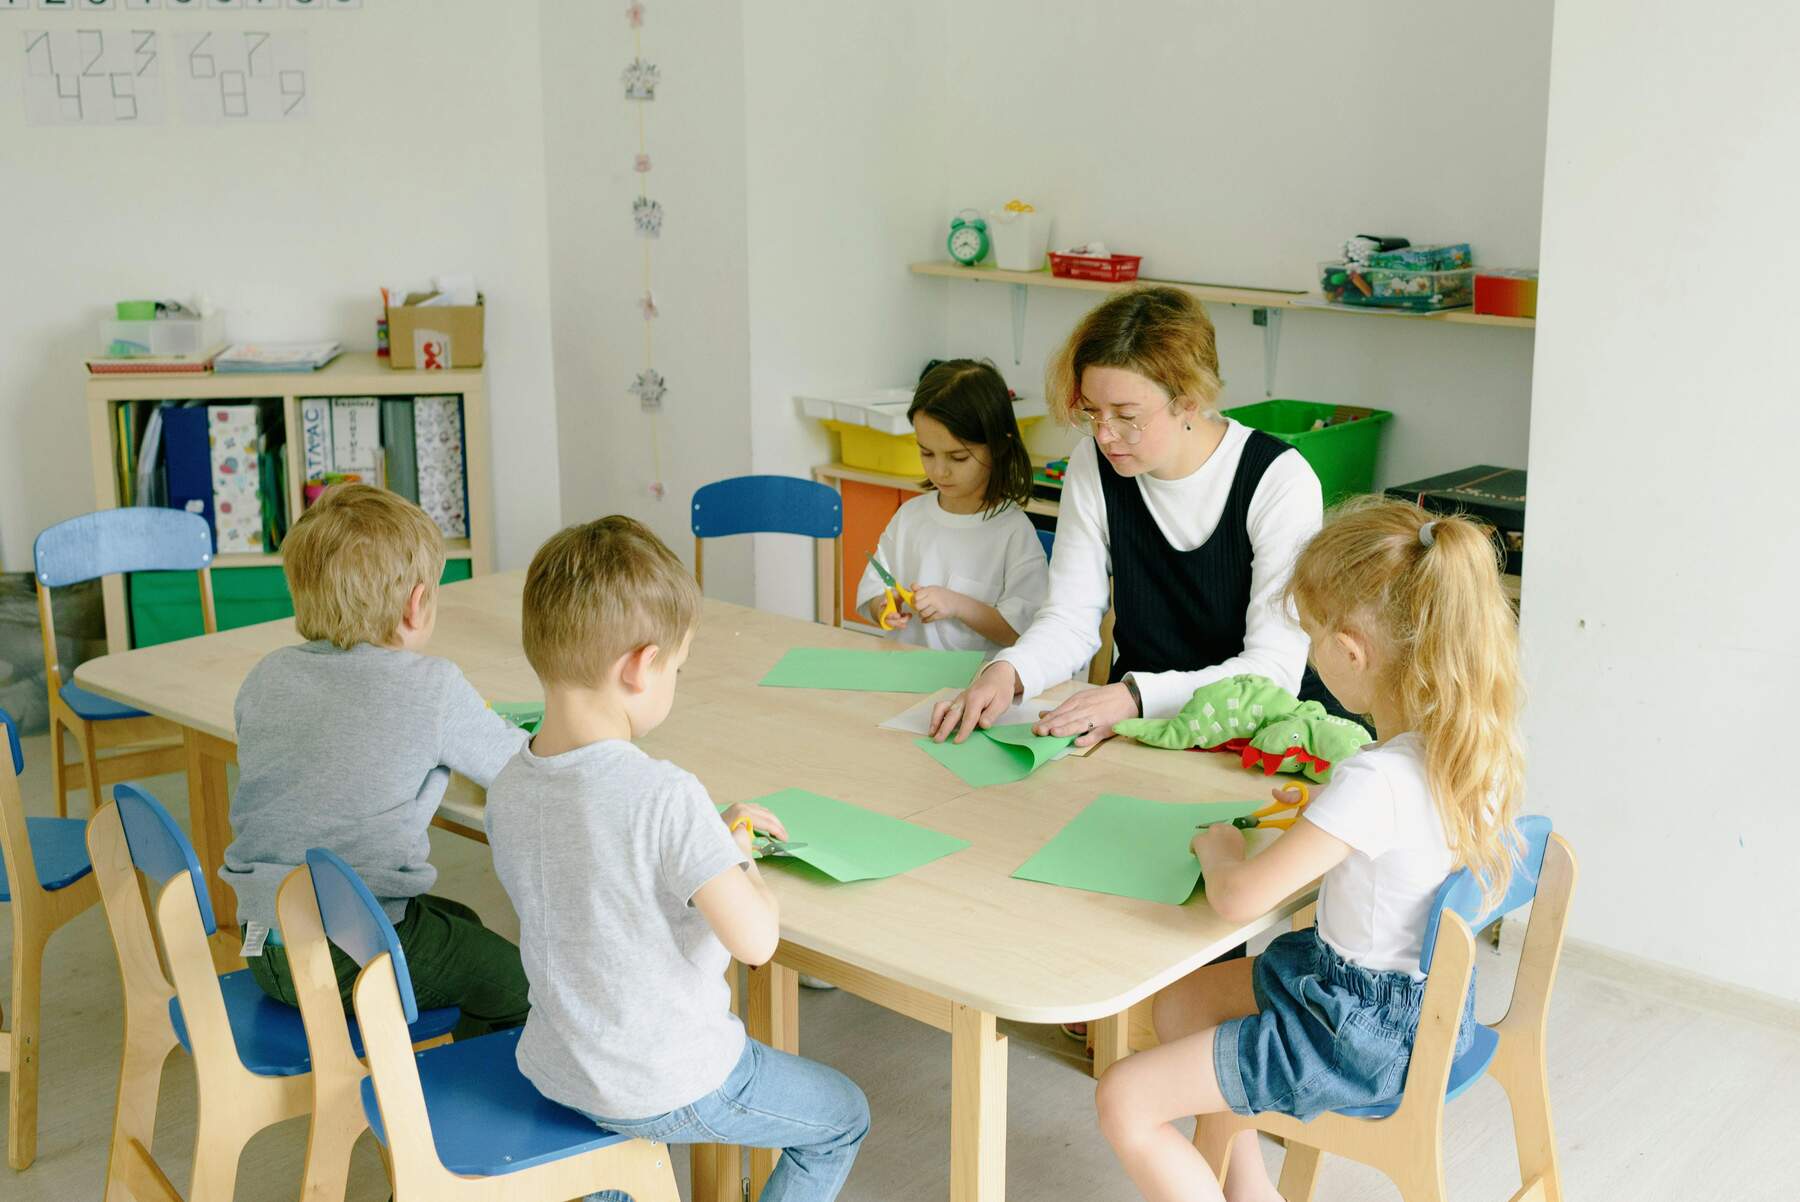 Woman sitting together with kids and teaching them how to fold paper planes